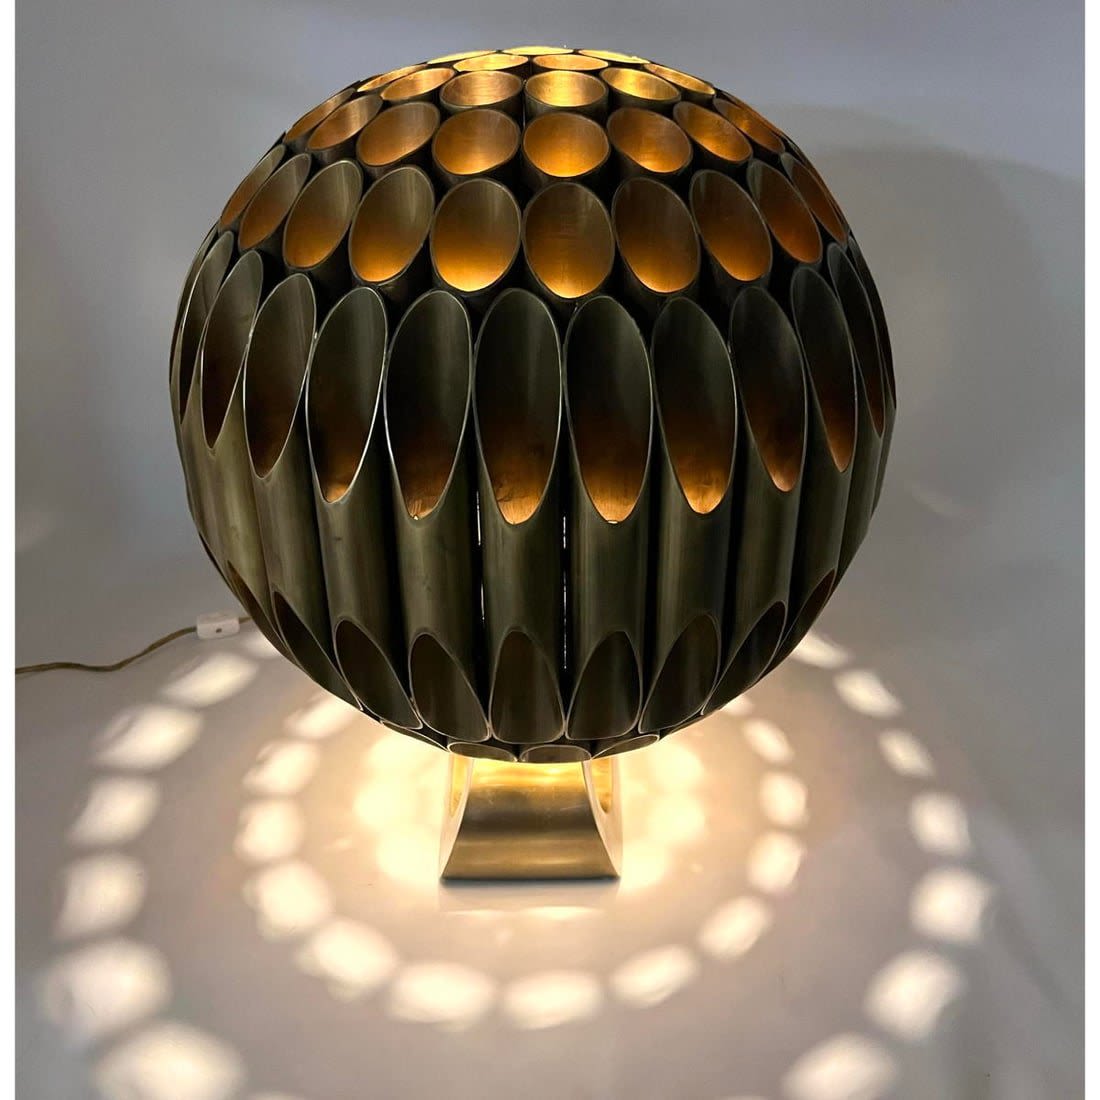 Heavy brass Ruche lamp in the style